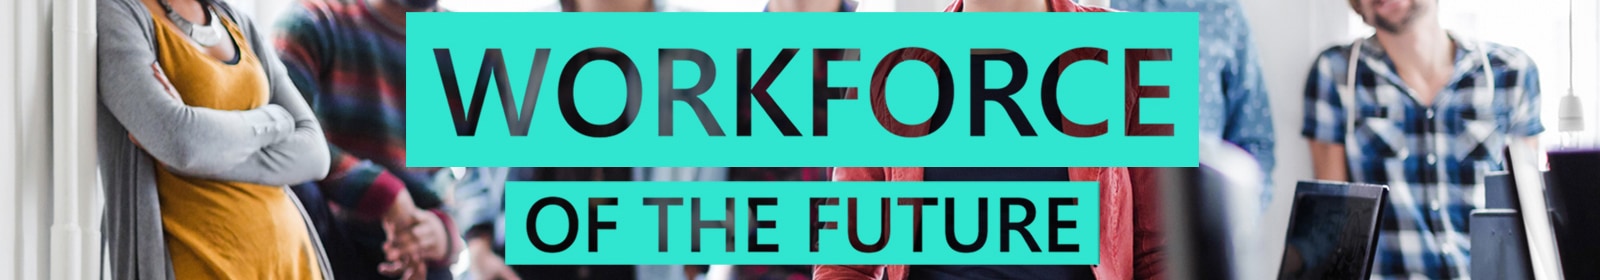 workforce of the future